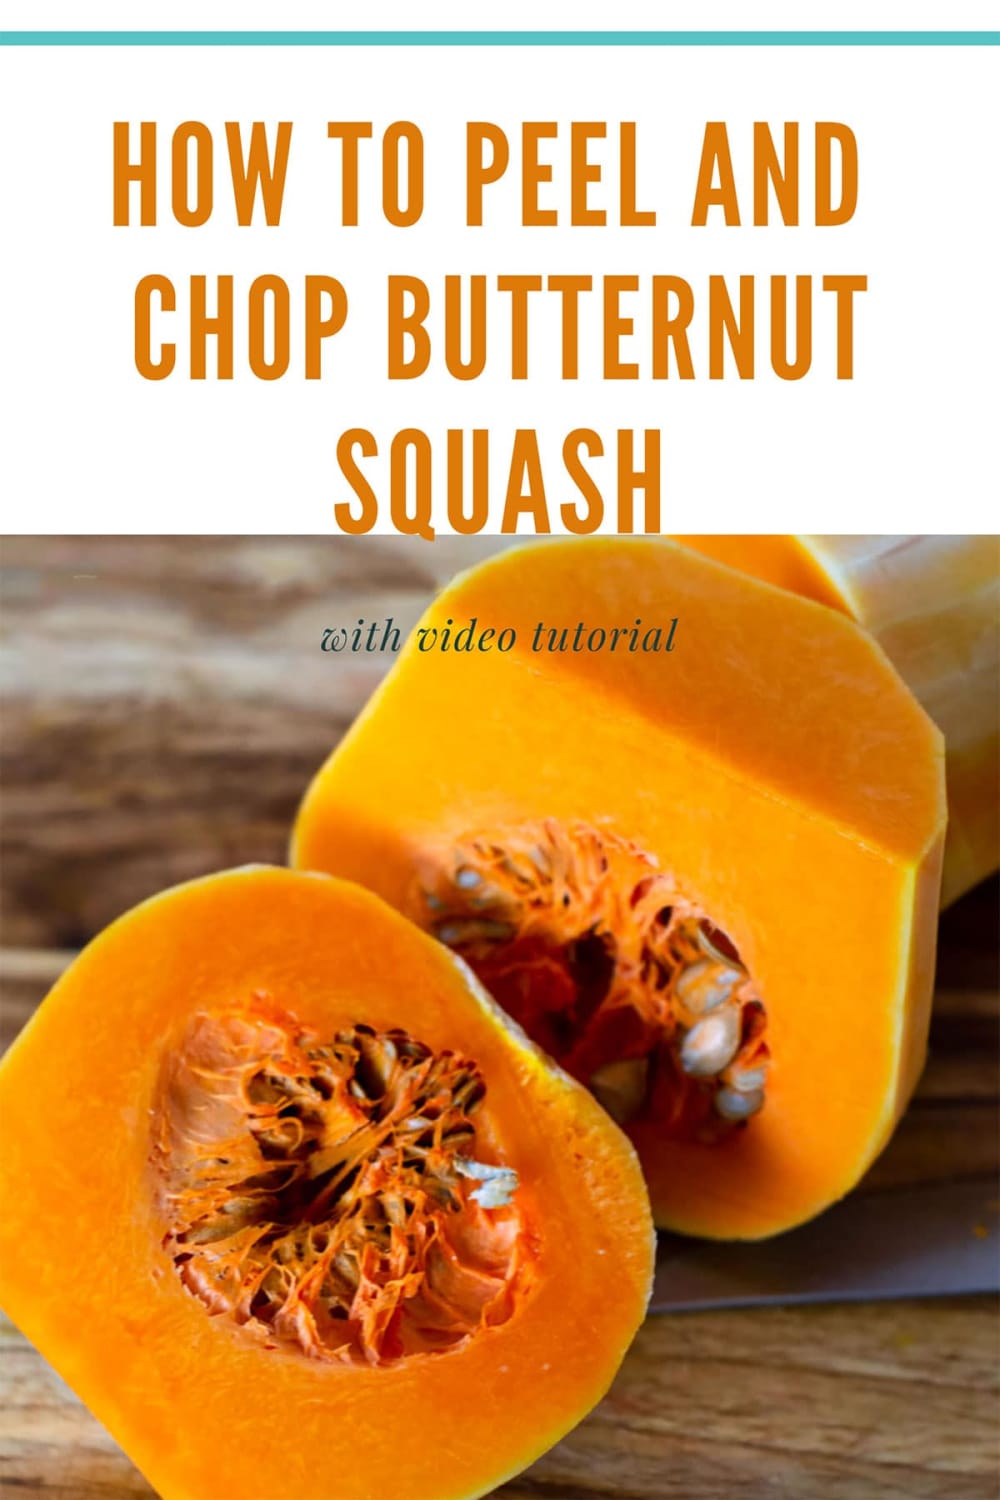 How To Peel And Chop Butternut Squash